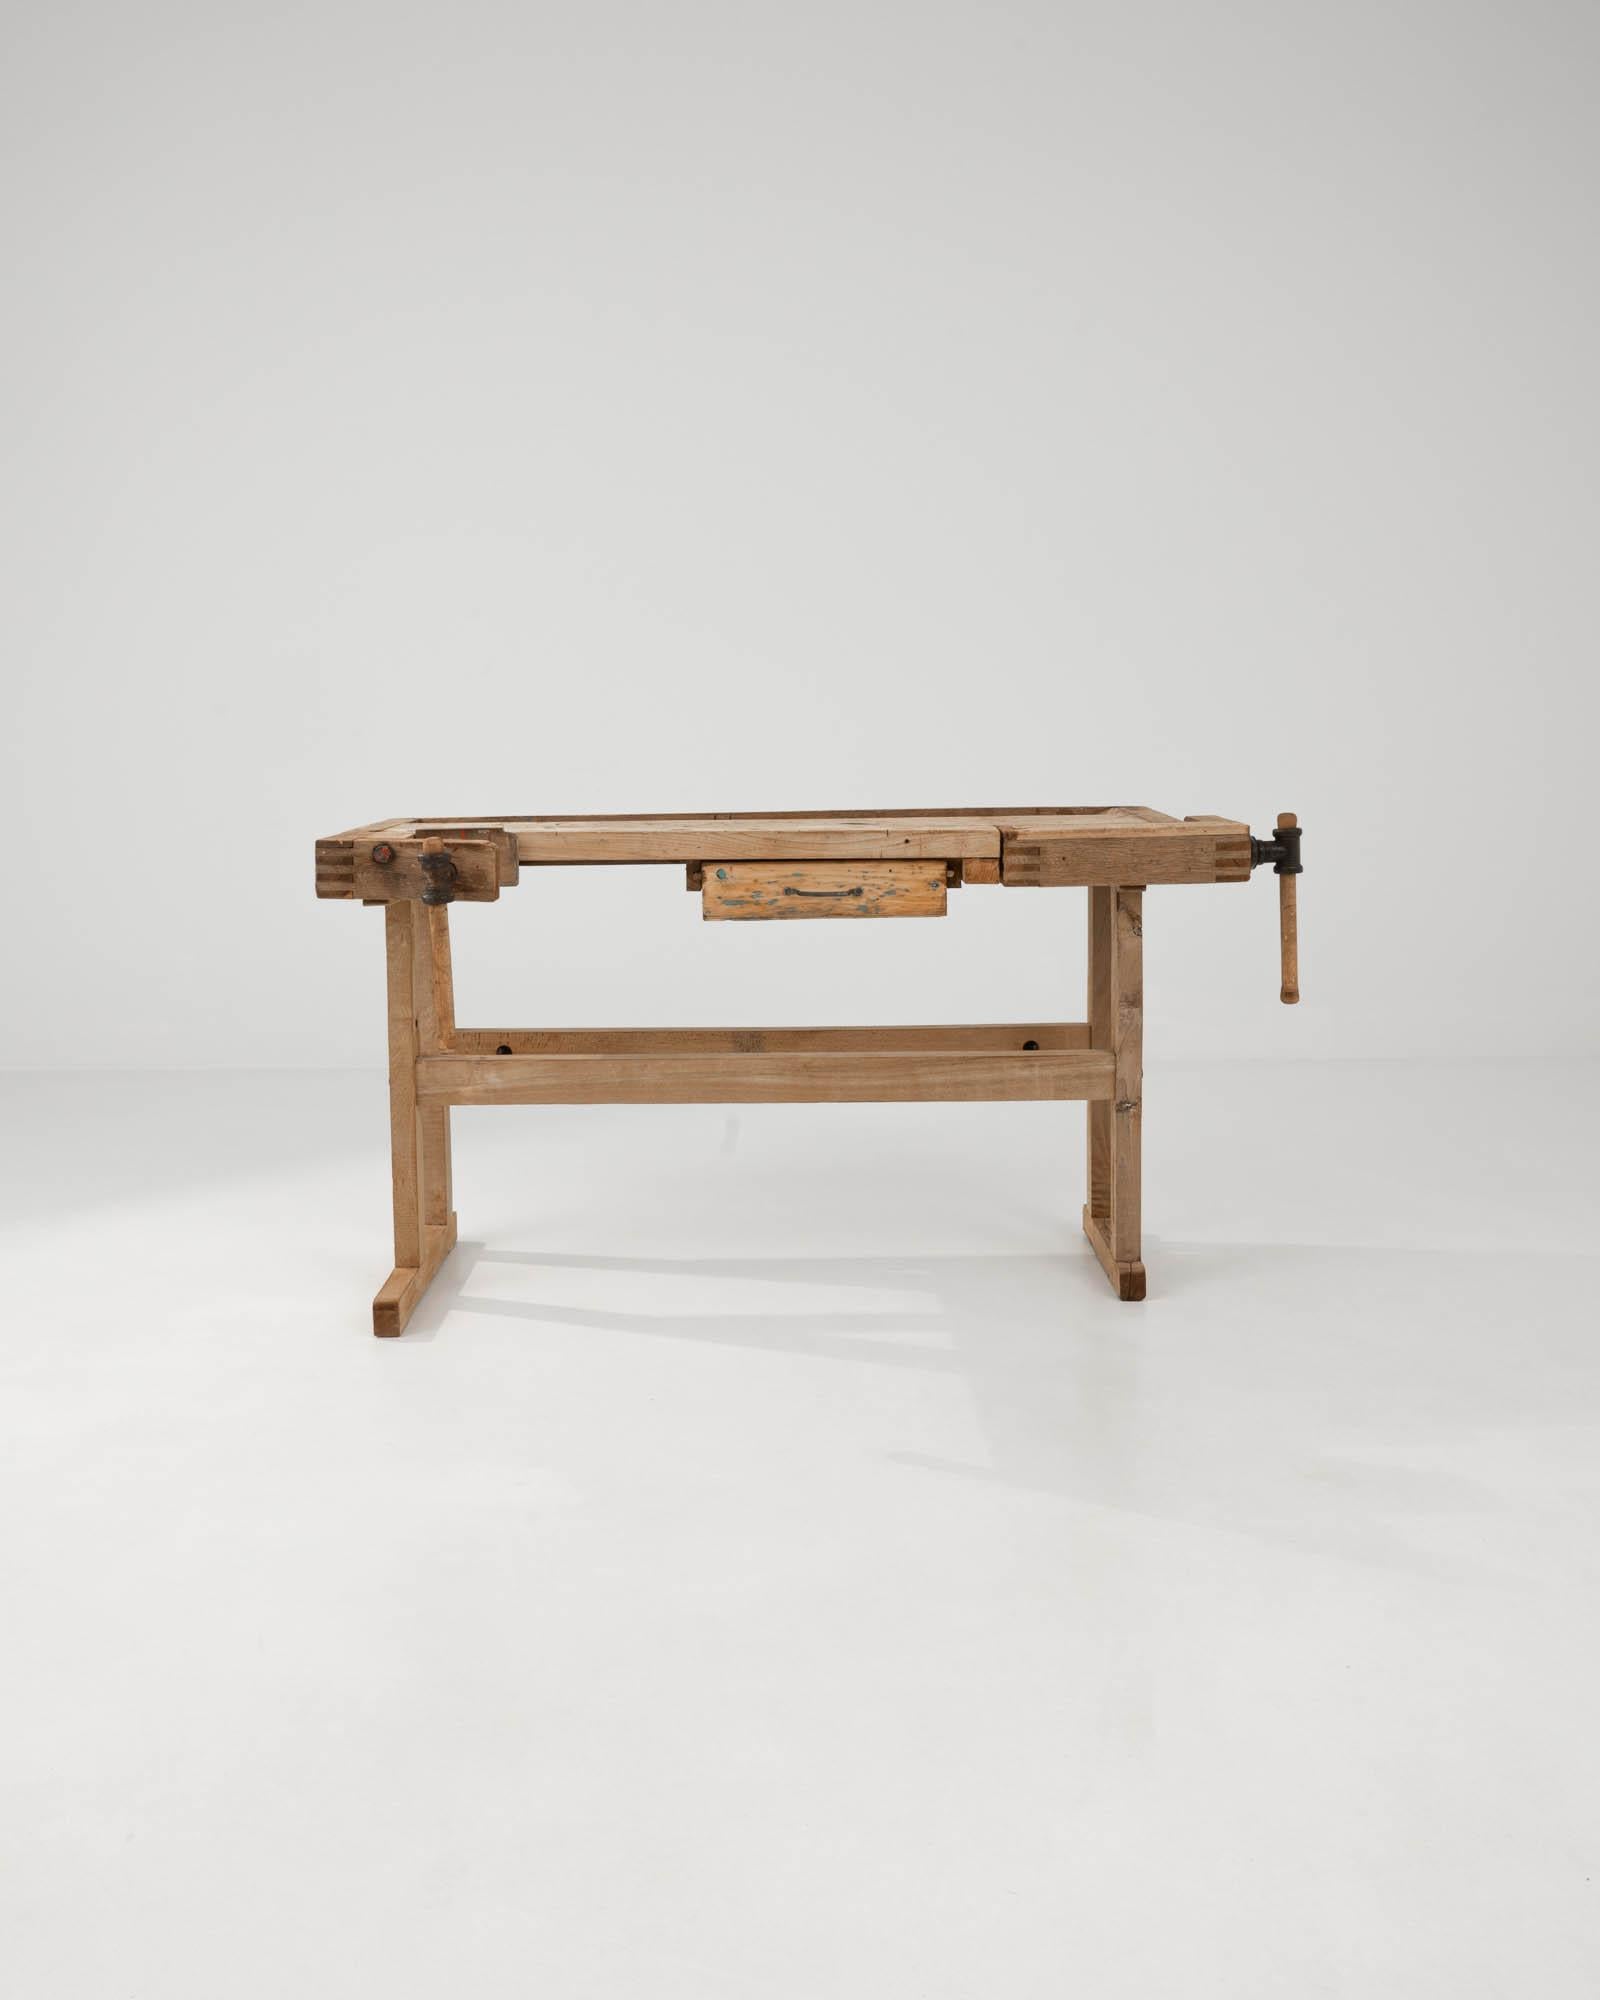 With its workmanlike design and warm natural finish, this vintage wooden table makes a striking Industrial accent. Built in Belgium in the 20th century, this piece would have originally been used as a carpenter’s work bench; the impressive iron